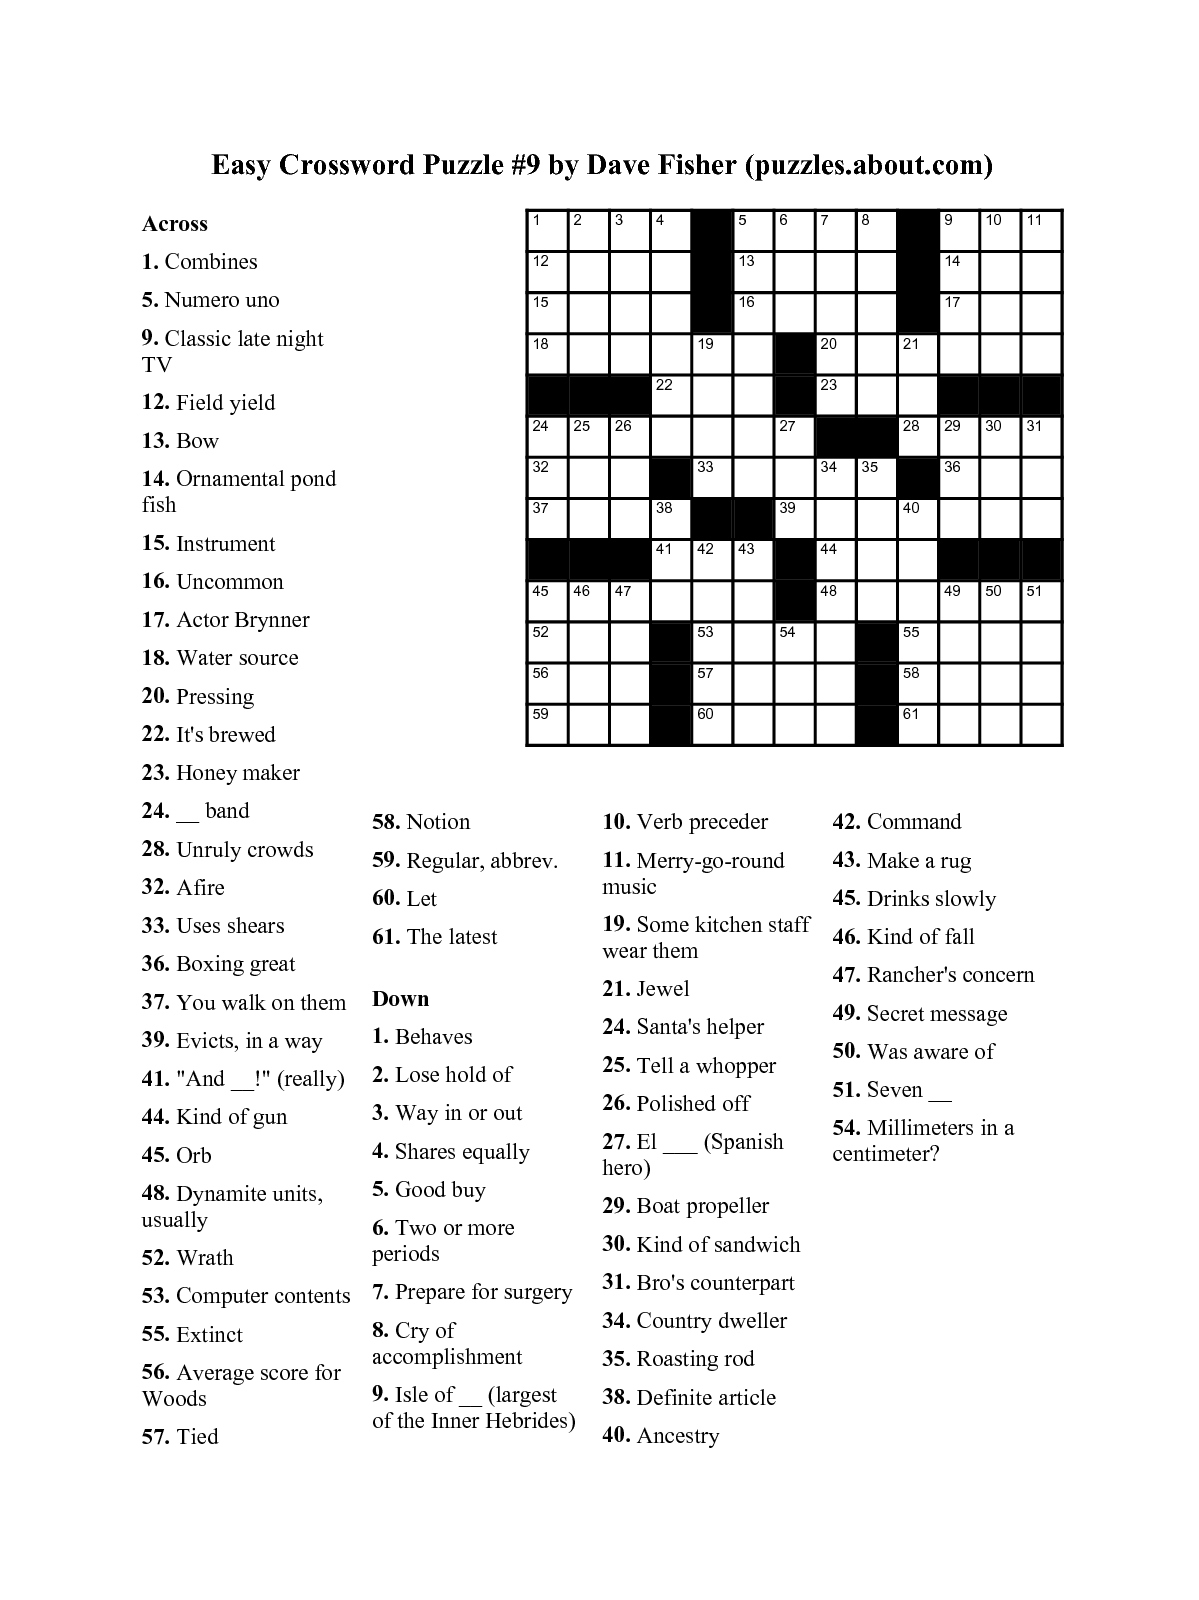 Easy Crossword Puzzle _9Dave Fisher _Puzzlesaboutcom_Lonyoo - Free Printable Easy Crossword Puzzles Uk